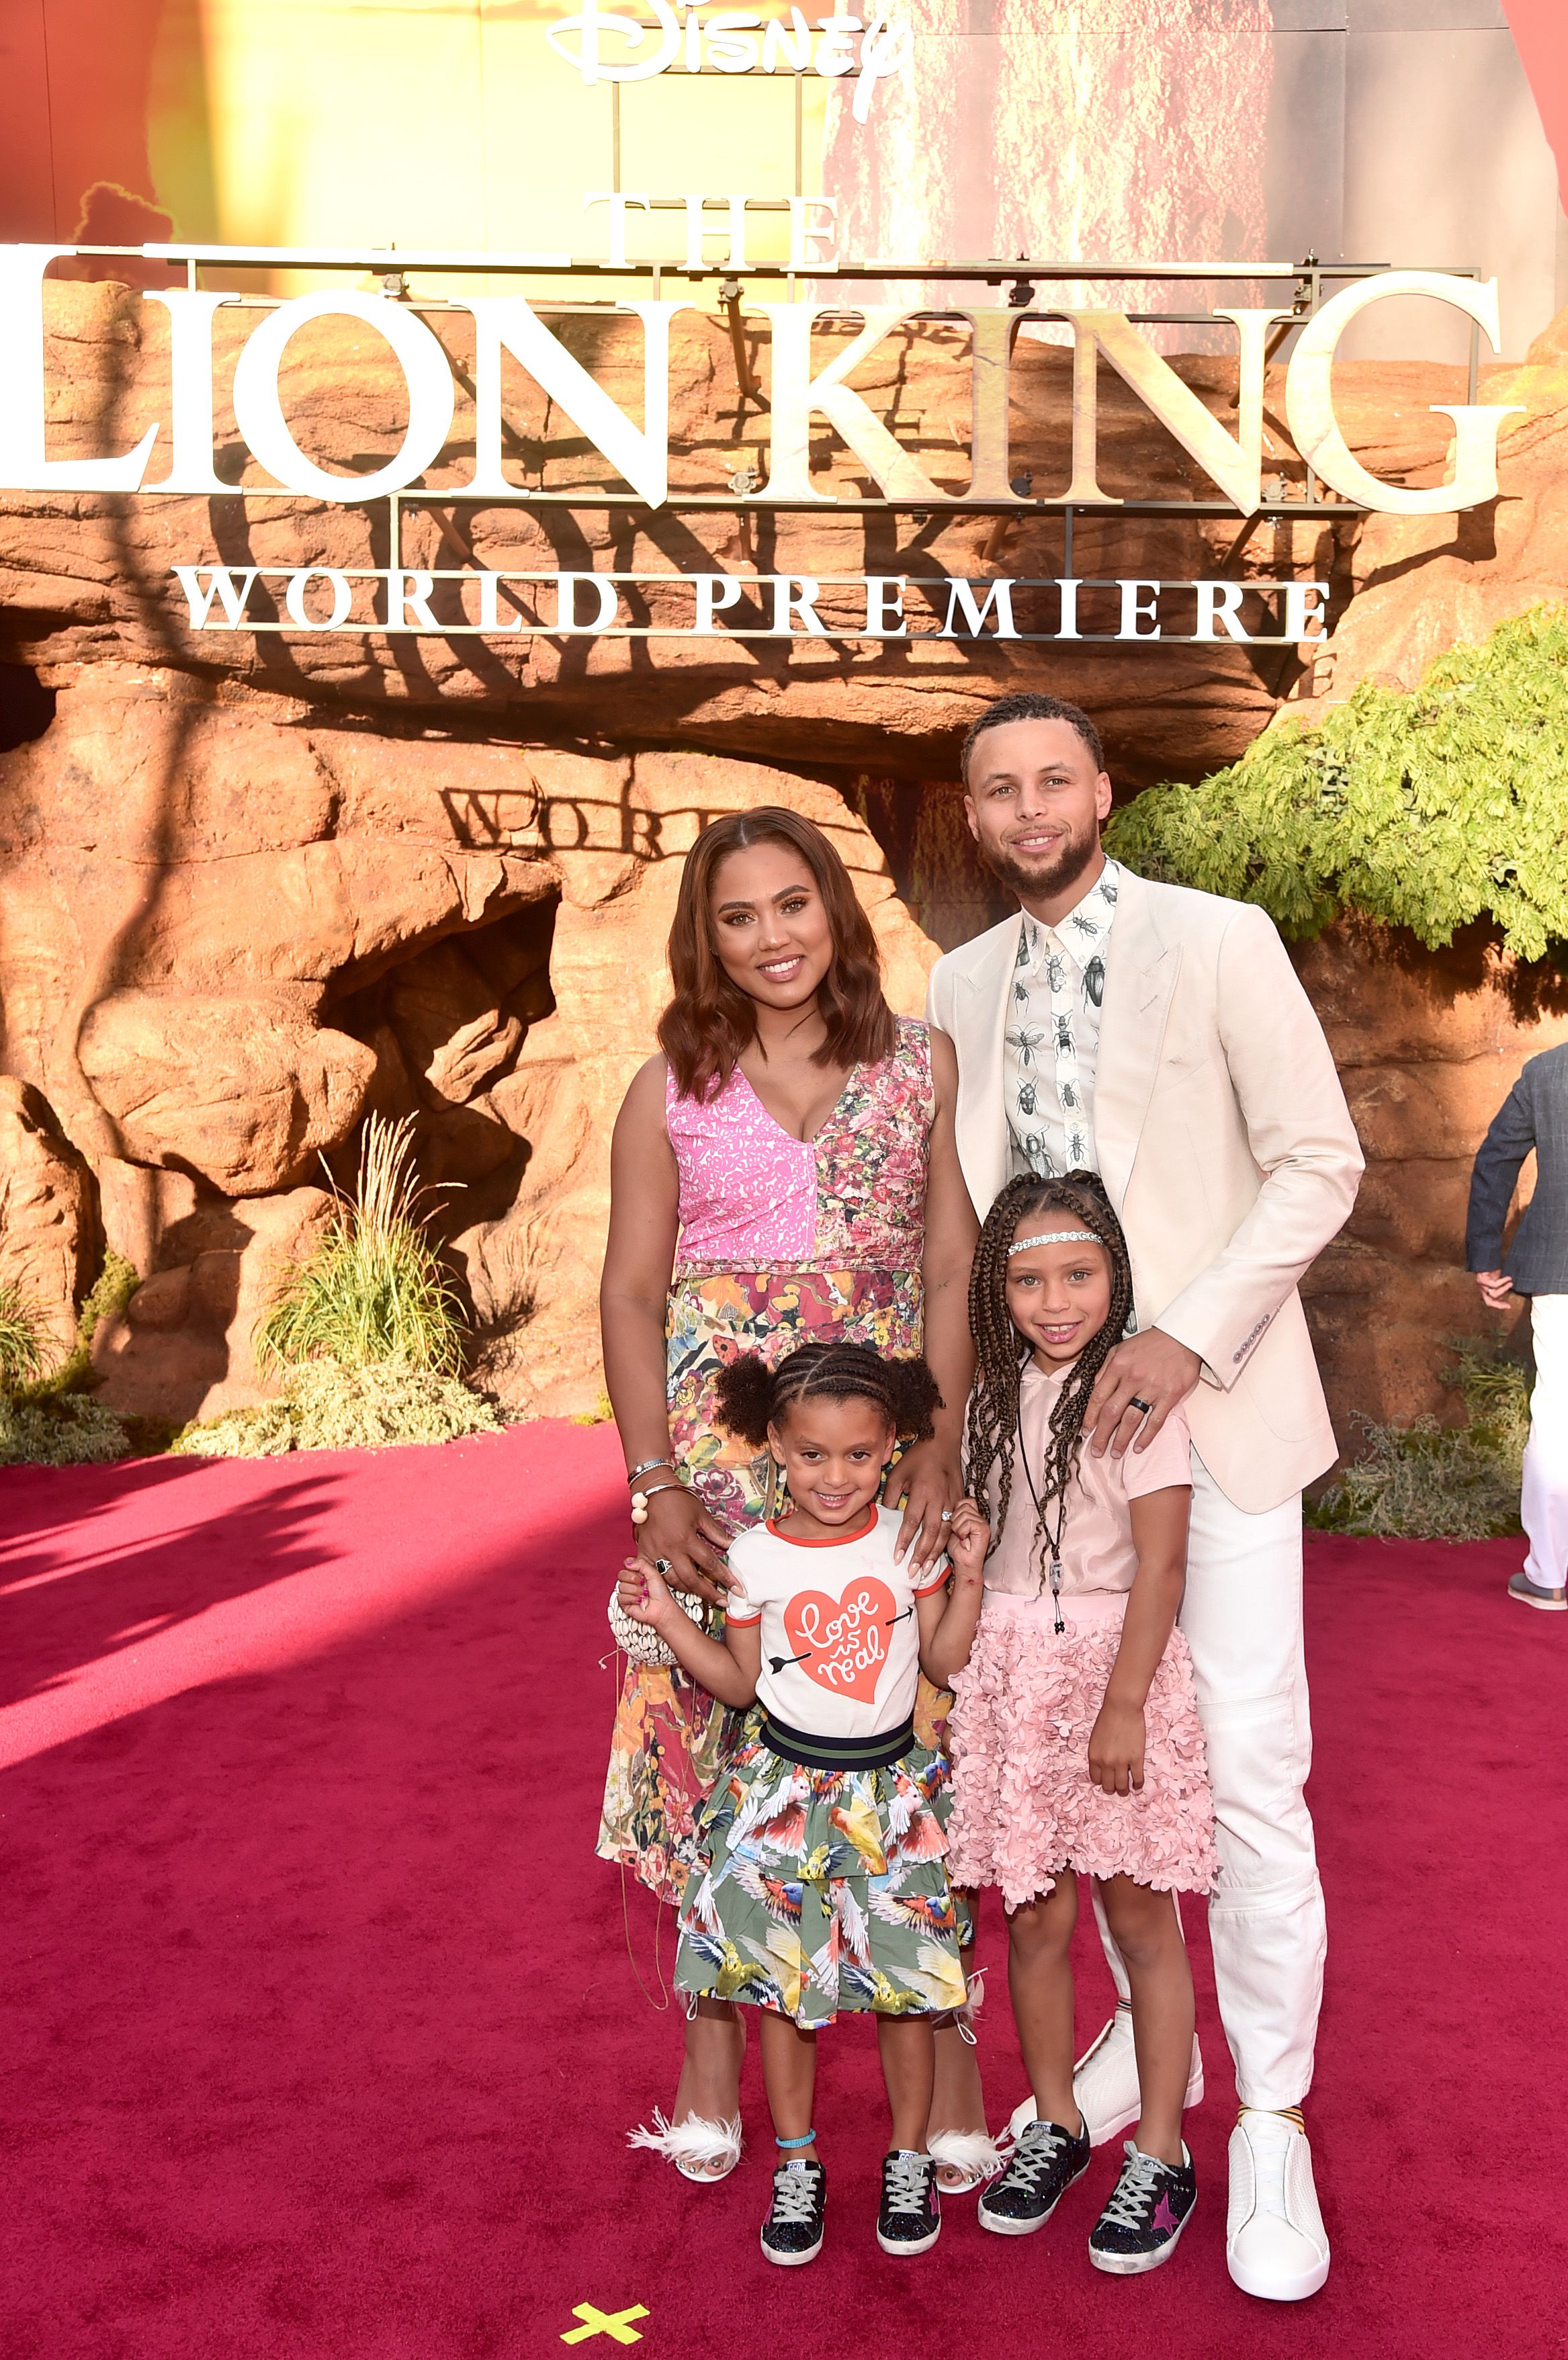 Ryan Curry, Ayesha Curry, Riley Curry, and Stephen Curry attend the world premiere of Disney's "The Lion King" in July 2019 | Photo: Getty Images